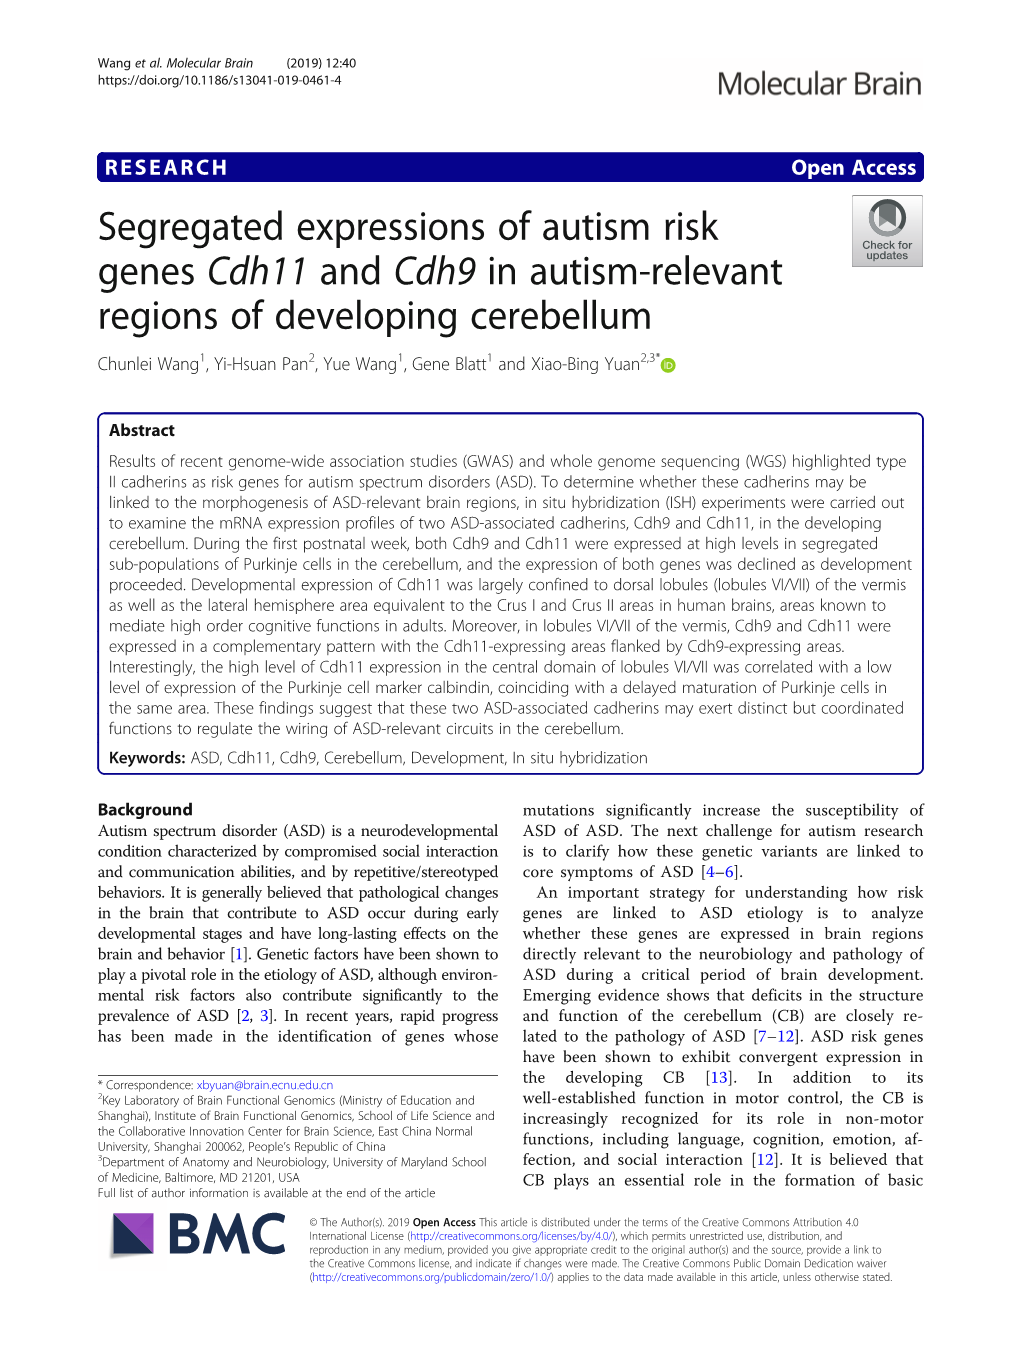 Segregated Expressions of Autism Risk Genes Cdh11 and Cdh9 in Autism